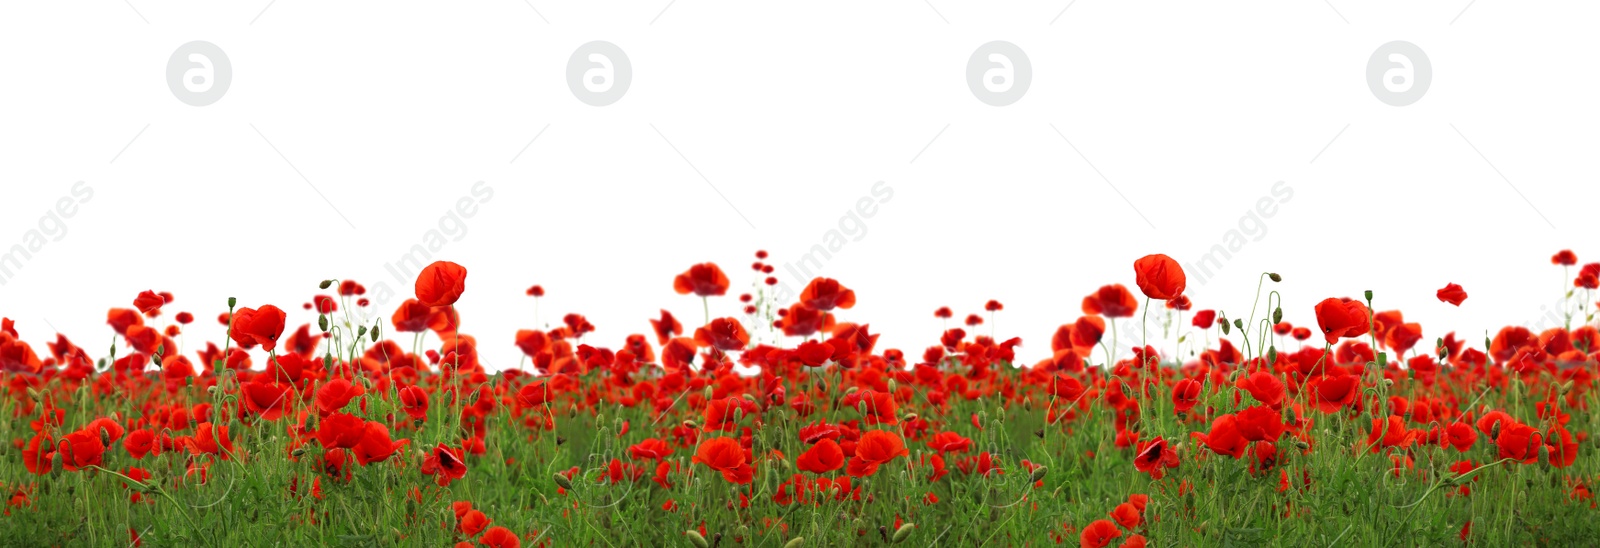 Image of Beautiful red poppy flowers growing in field on white background. Banner design